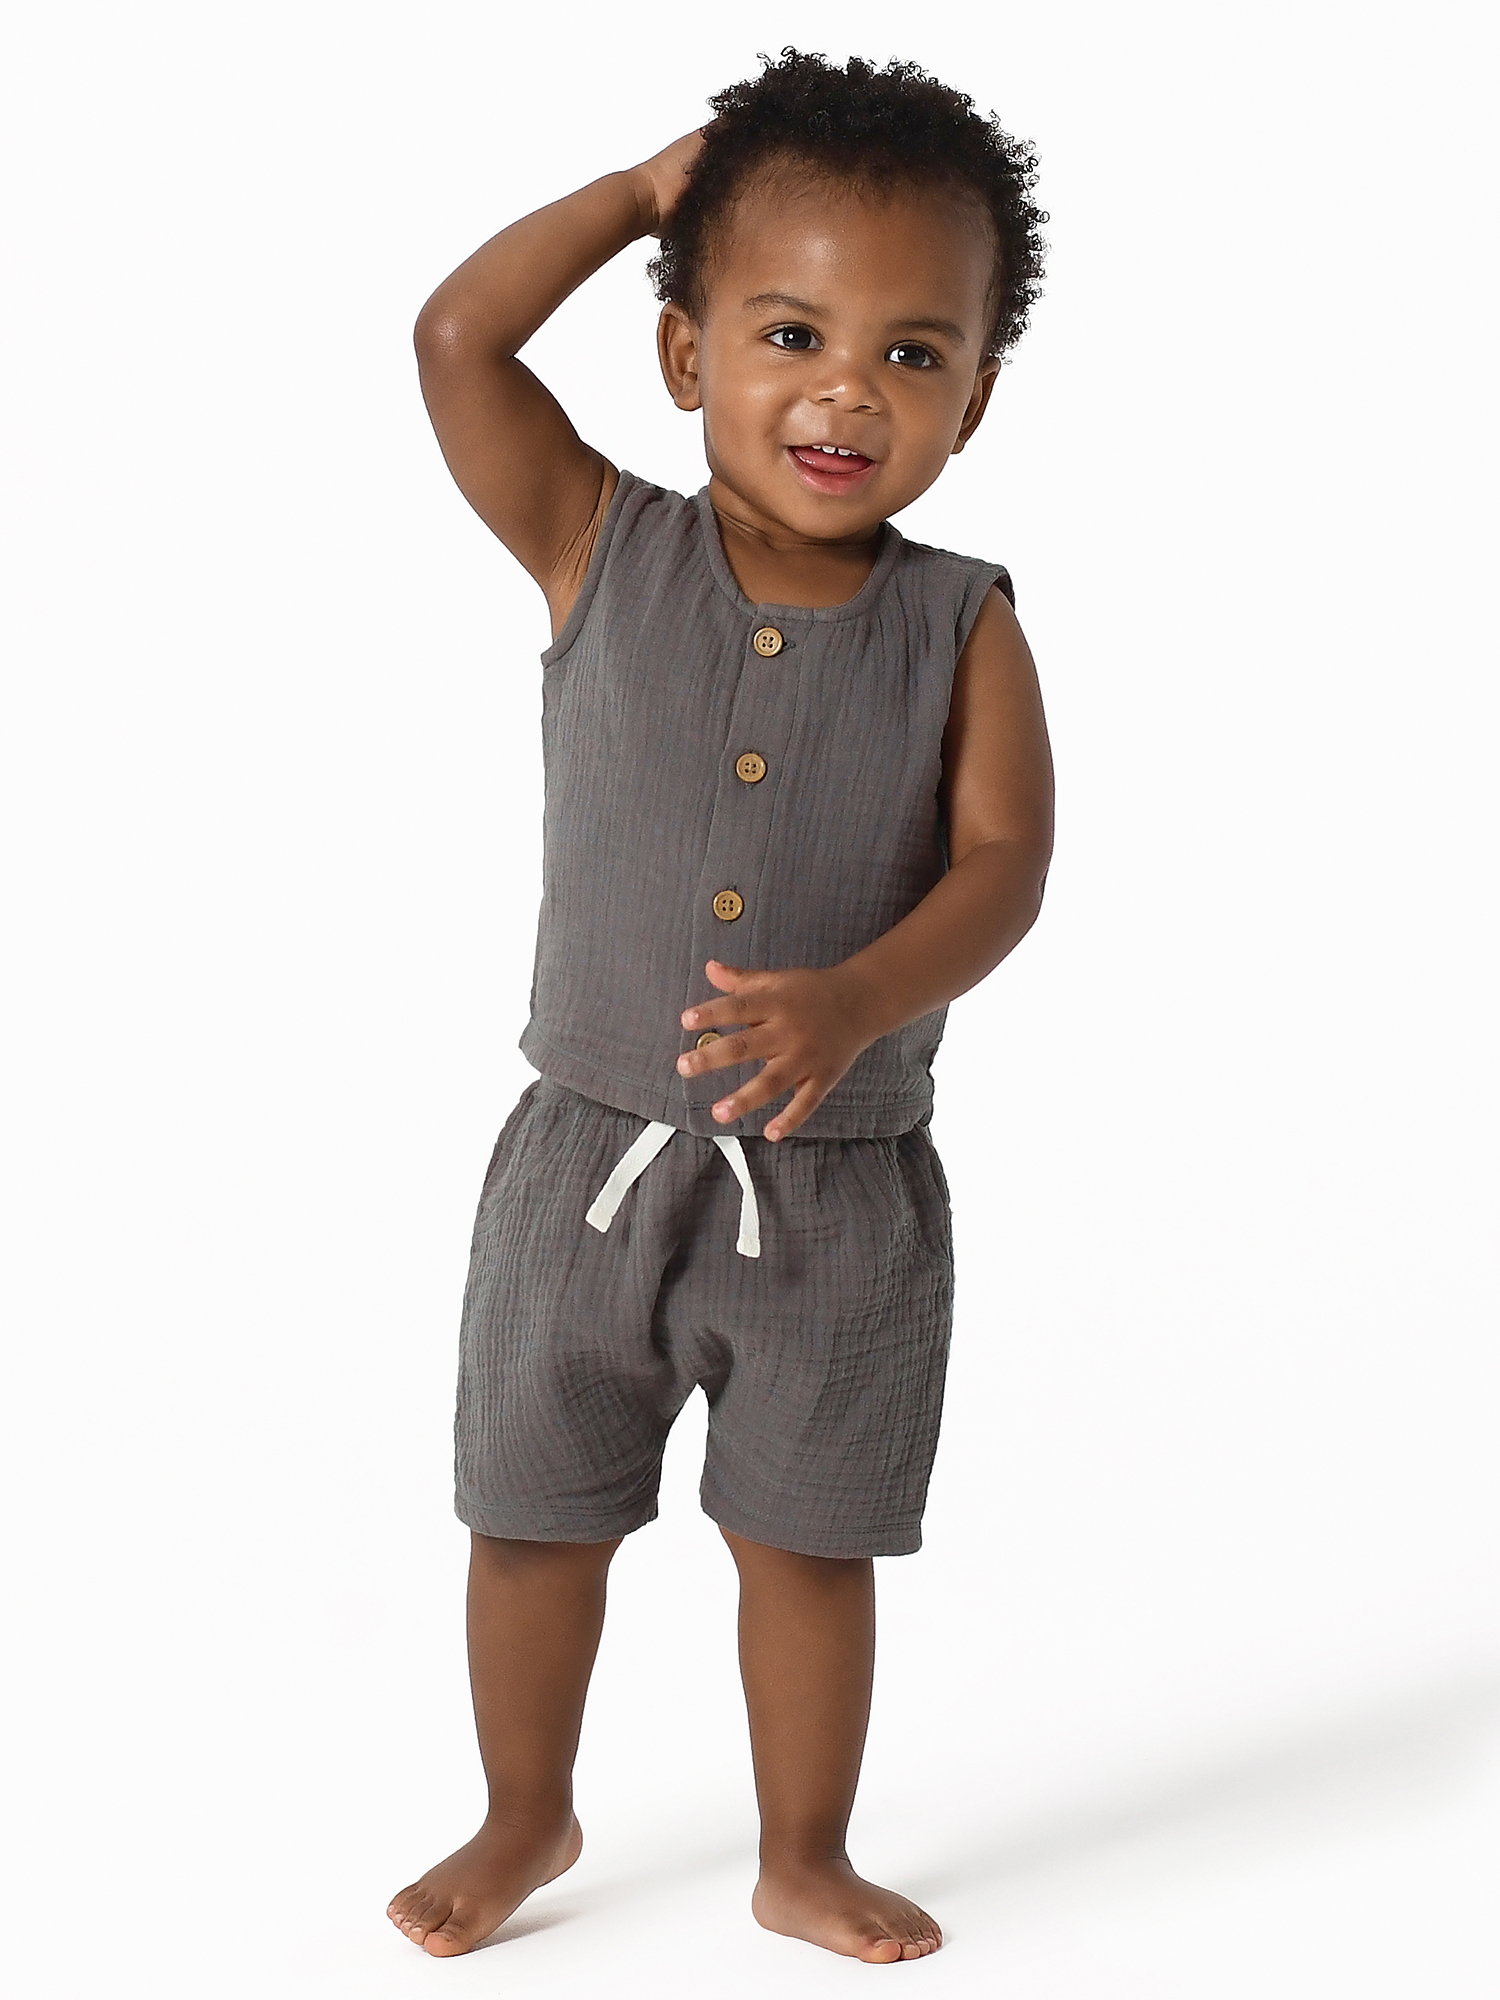 Modern Moments by Gerber Baby Boy Top and Short Outfit Set, 2 Piece, Sizes 0/3 Months-24 Months - image 1 of 11